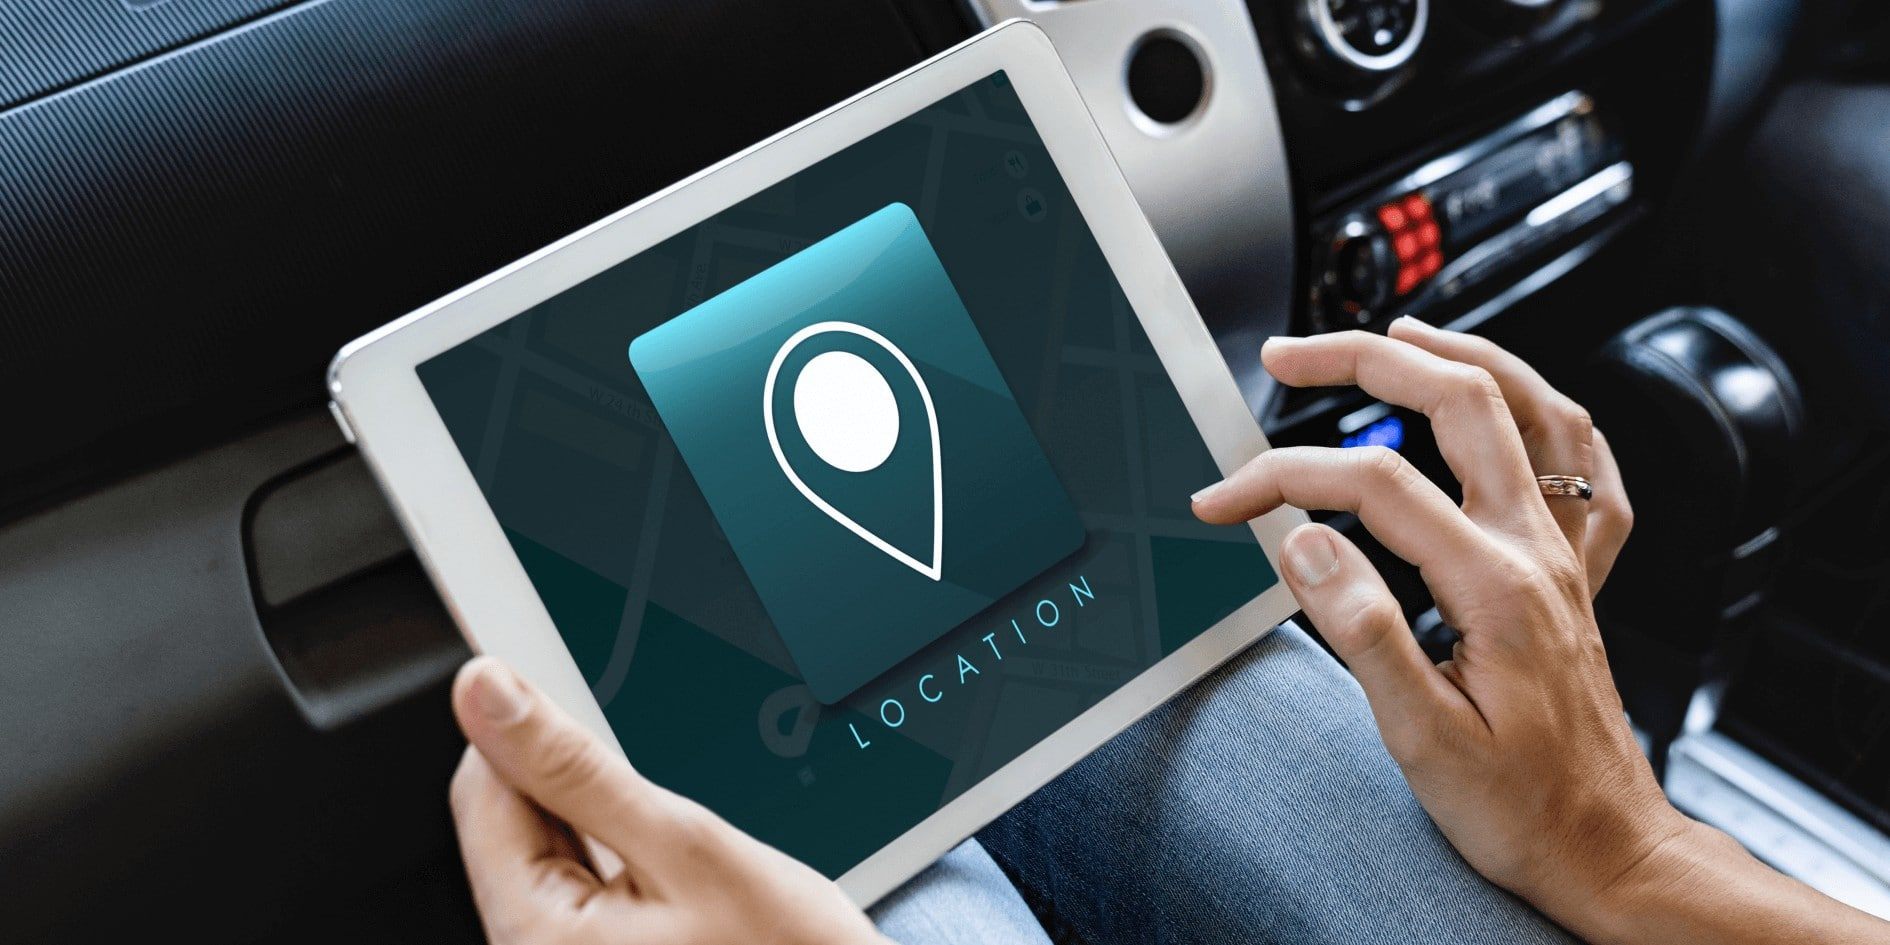 Check Out These Apps to Track a Car's Location